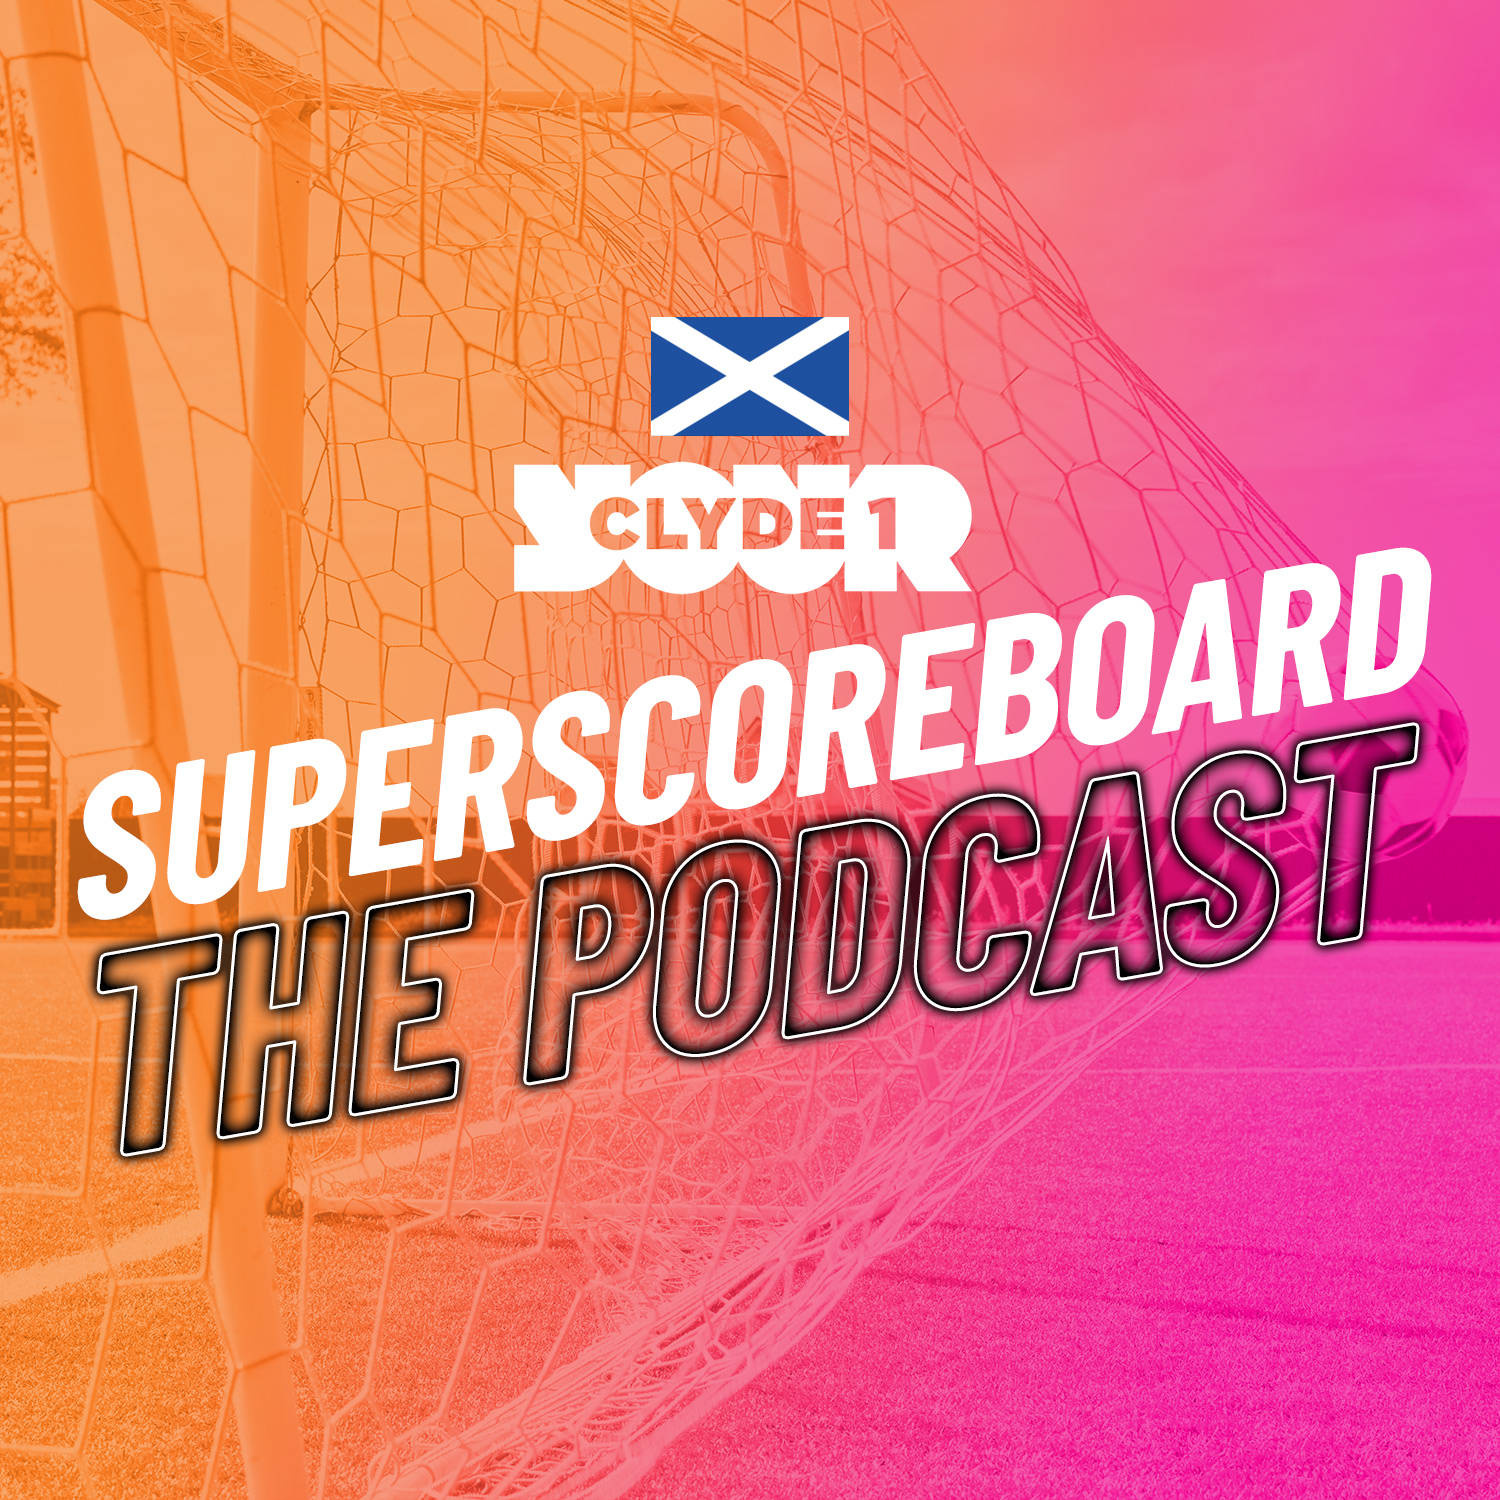 Saturday 9th March Clyde 1 Superscoreboard Part 1